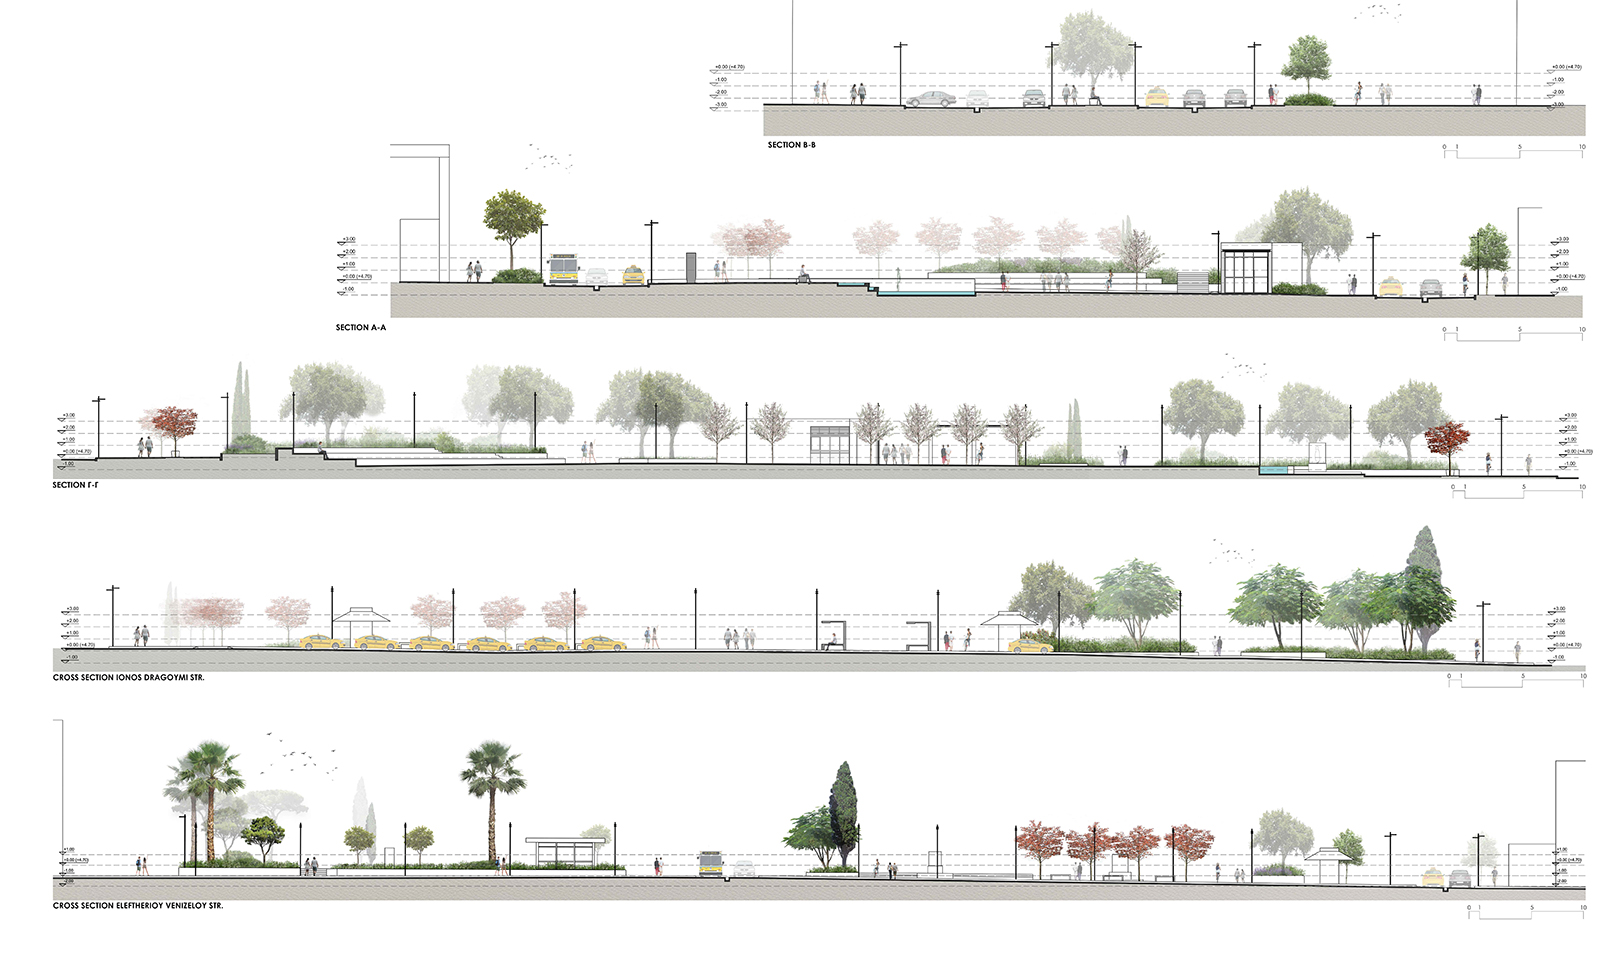 Archisearch Proposal for the Architectural Competition 